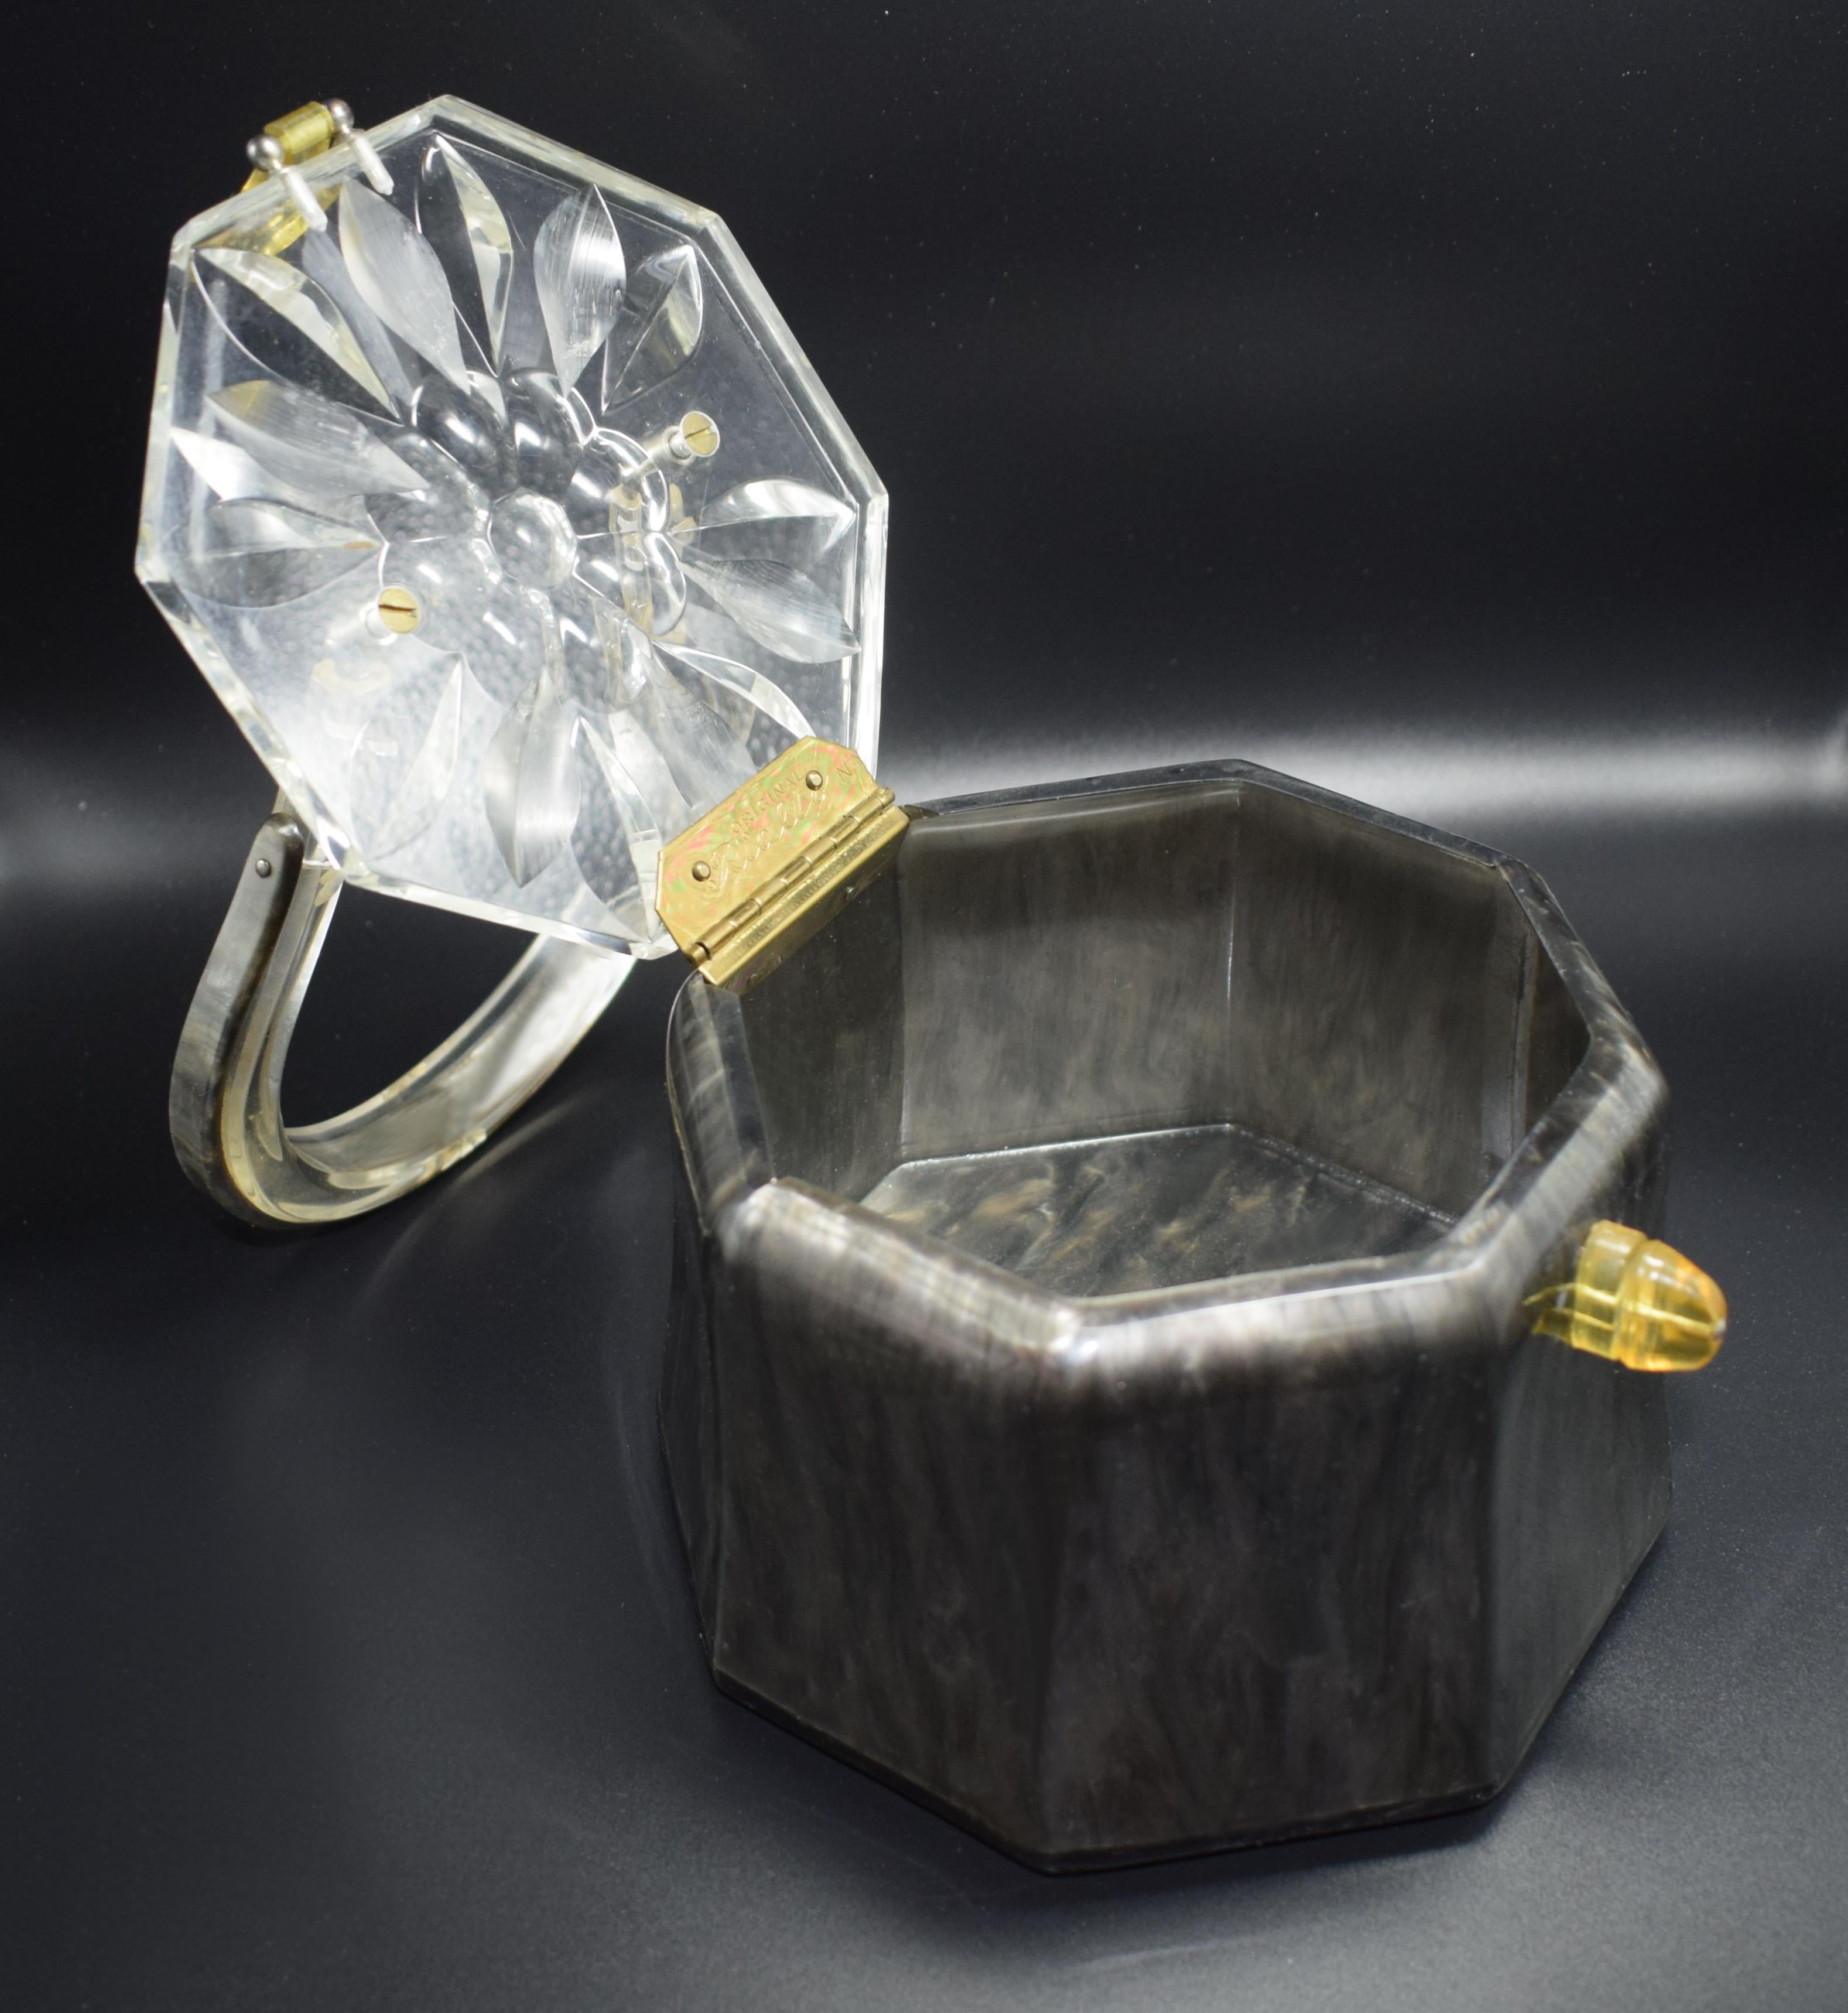 Fabulous 1950s Lucite box bag by Rialto of New York. Deeply carved clear Lucite lid with clear horse shoe shaped solid handle. The body of the bag is marbled grey with a yellow Lucite clasp. Signed on the inside brass hinge 'Original by Rialto'.